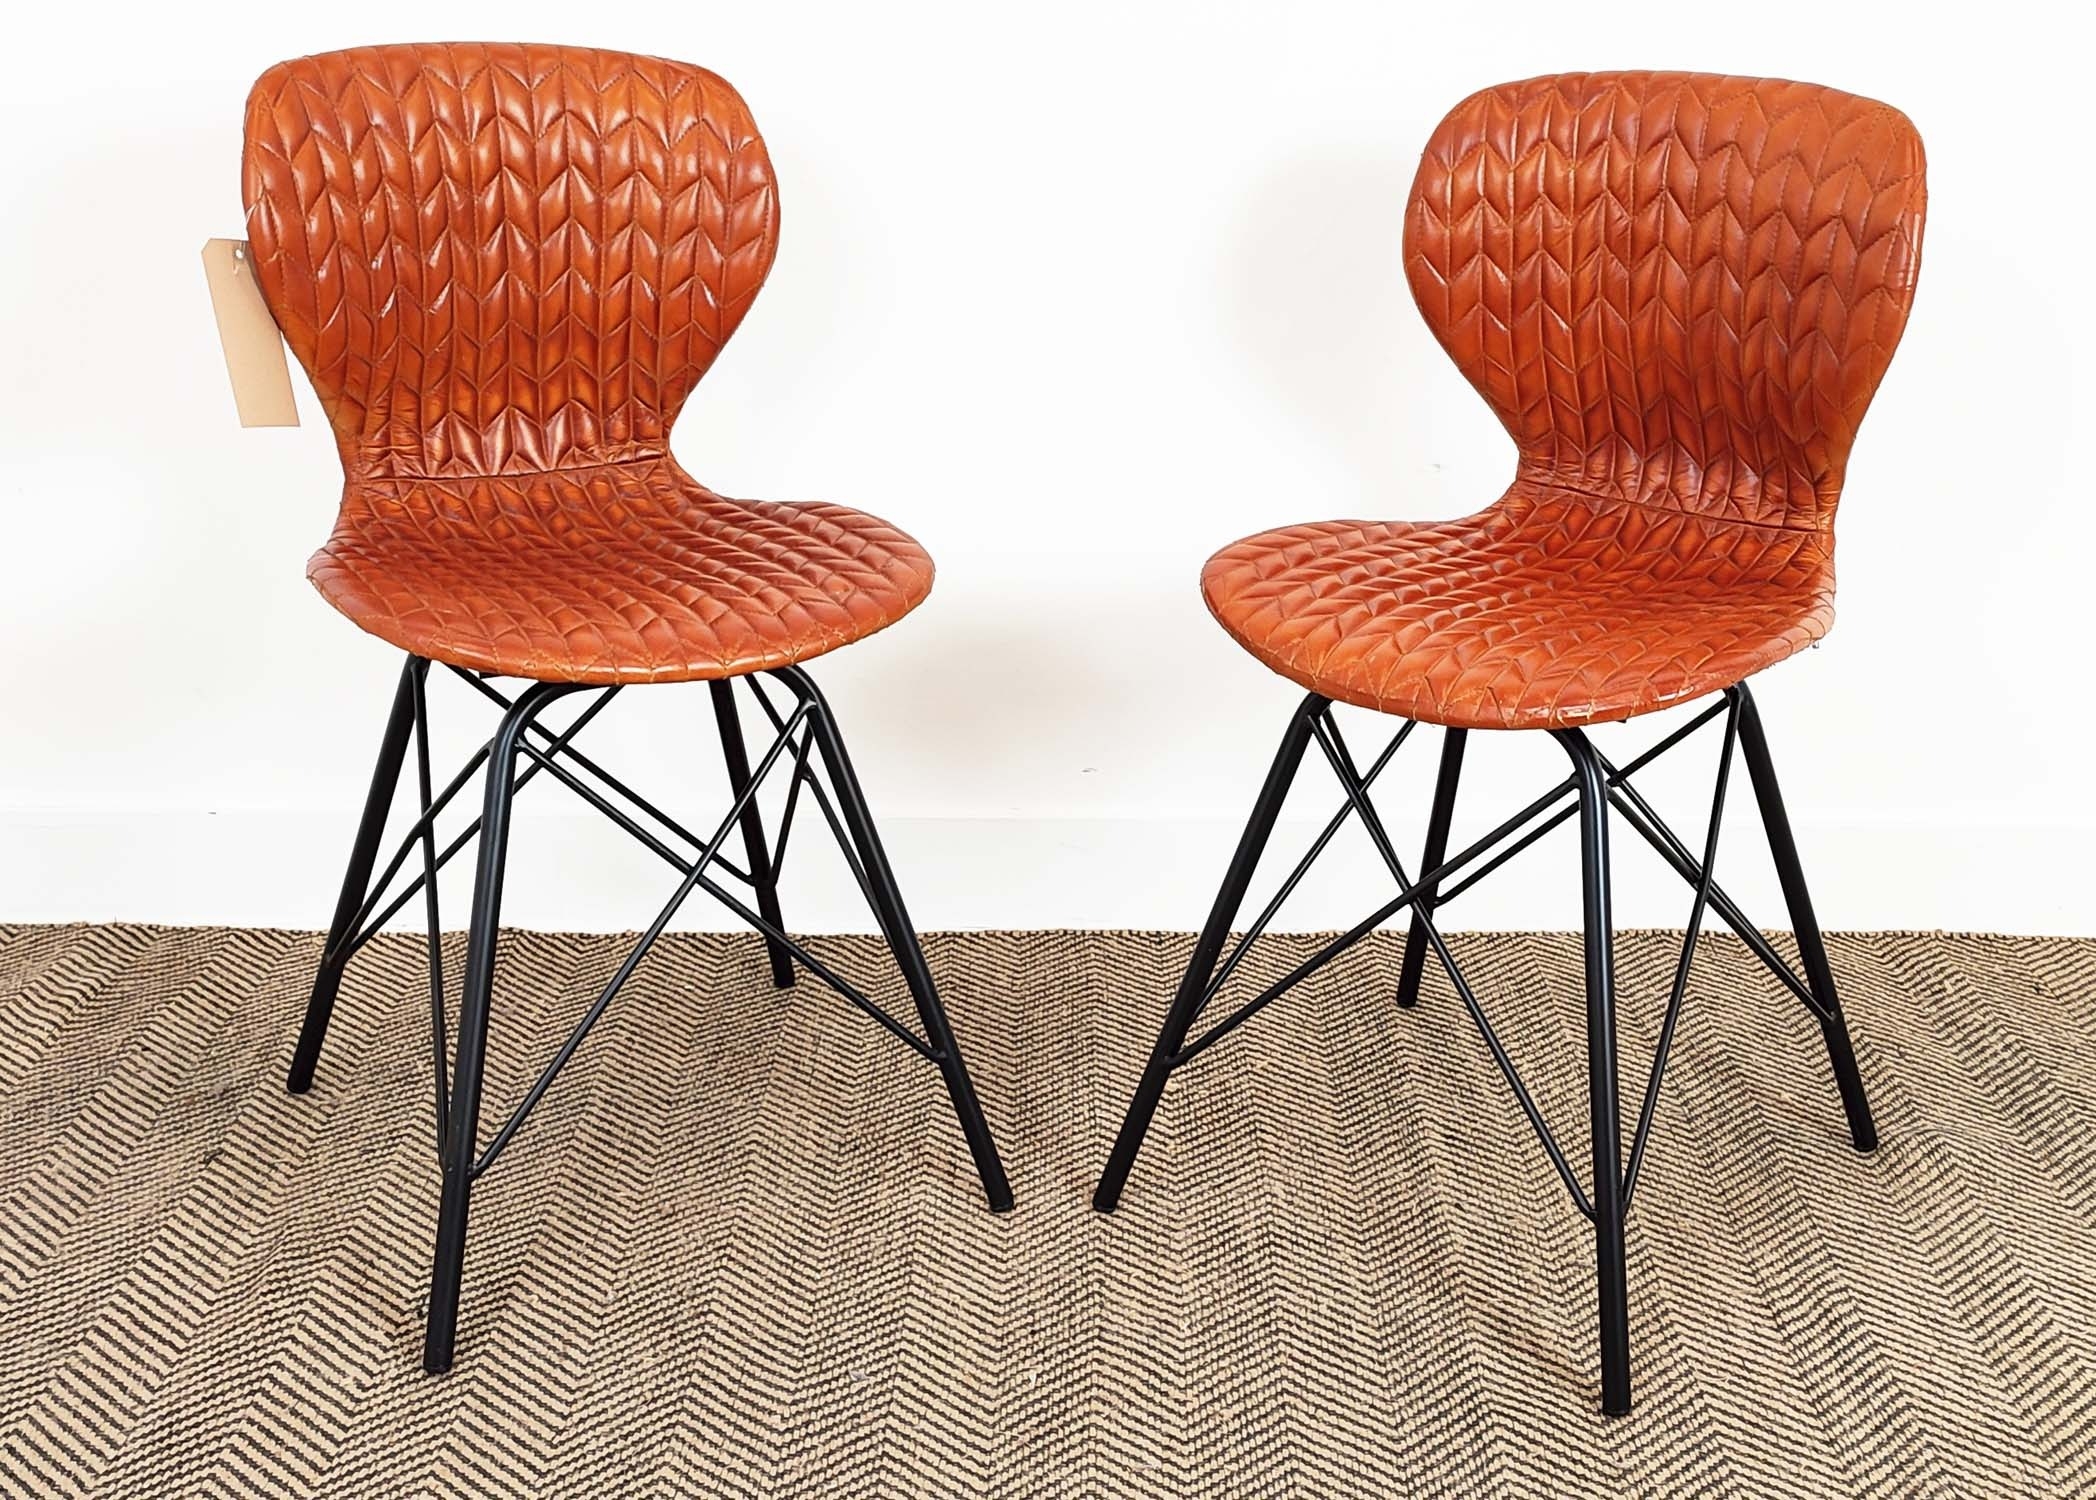 SIDE CHAIRS, a pair, stitched leather upholstery, 85cm H x 42cm W x 46cm D. (2)